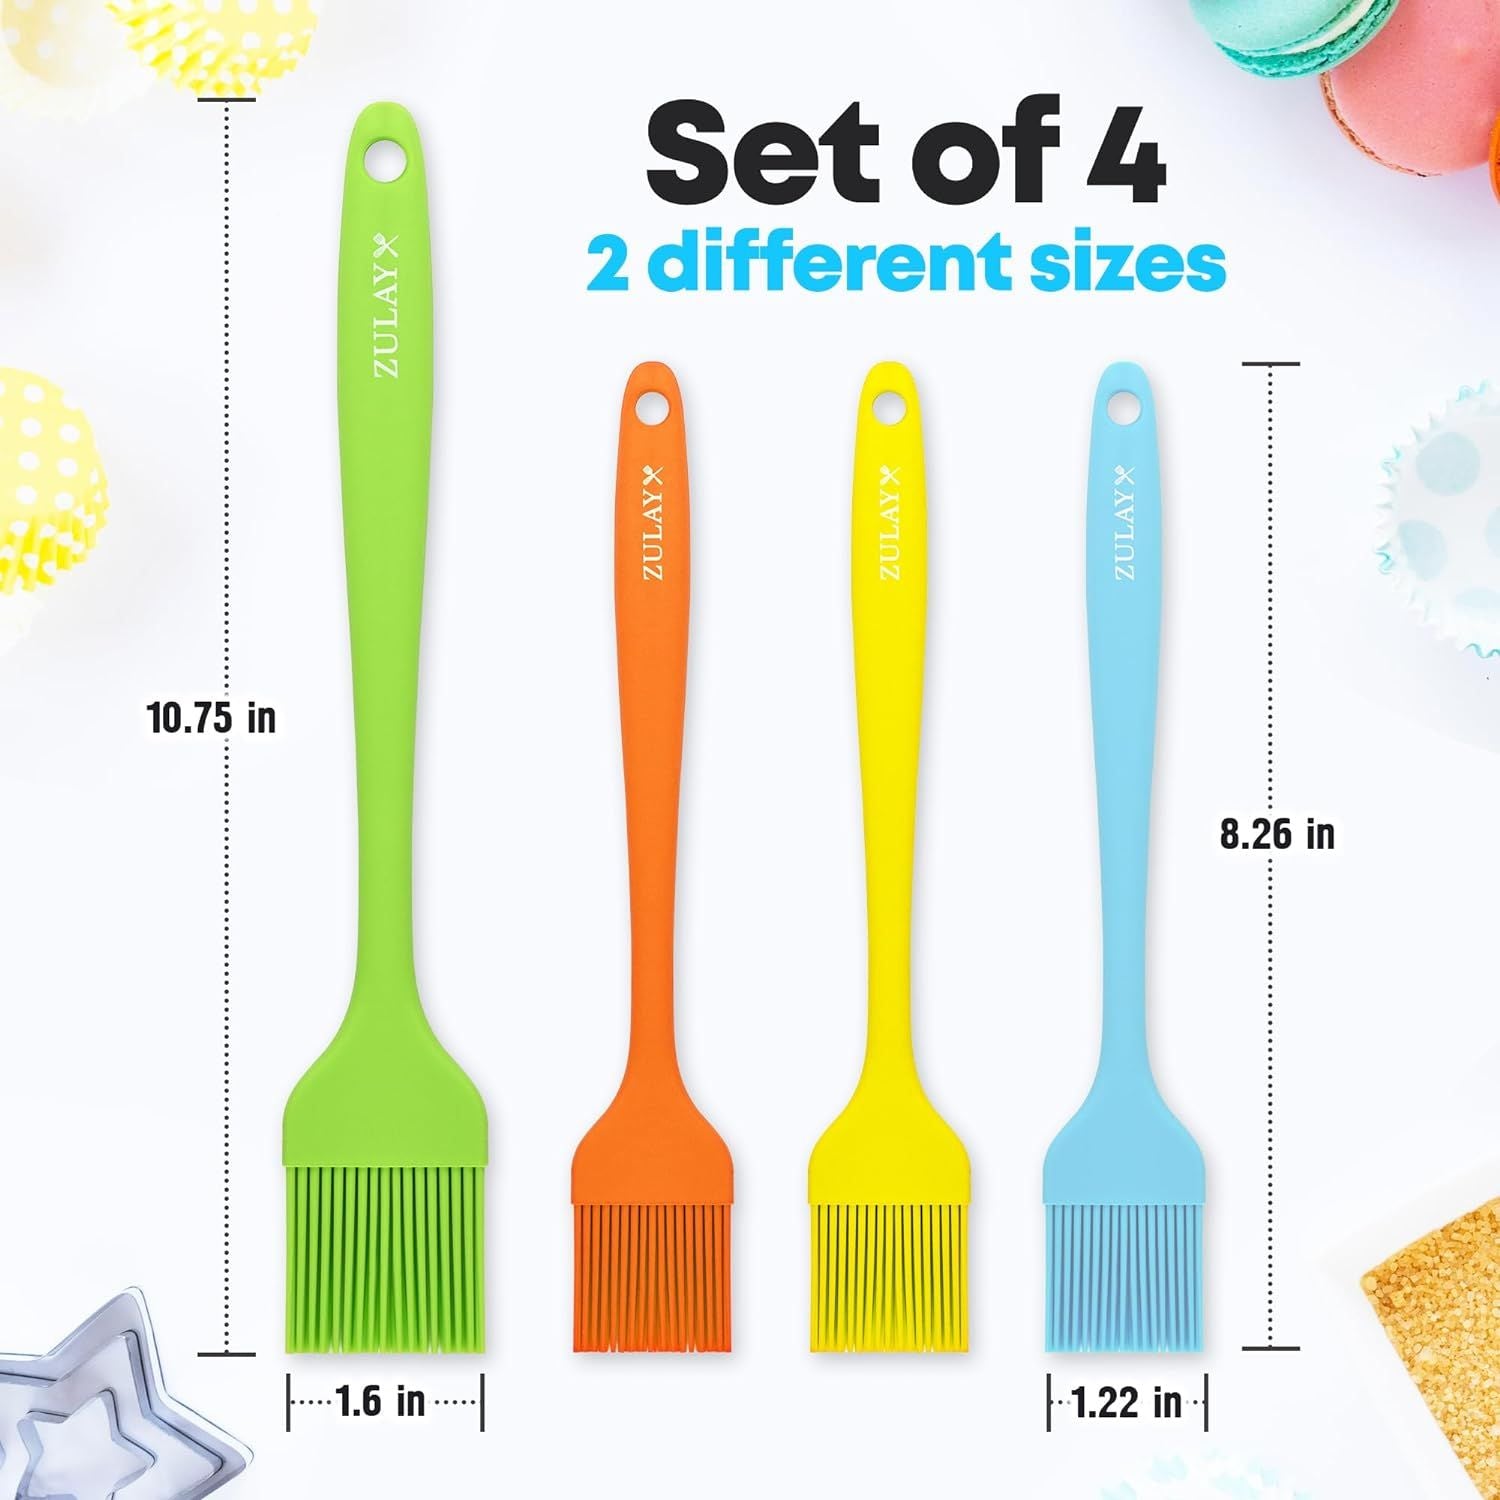 Zulay Kitchen (Set of 4) Heat Resistant Silicone Basting Brush with Soft Flexible Bristles